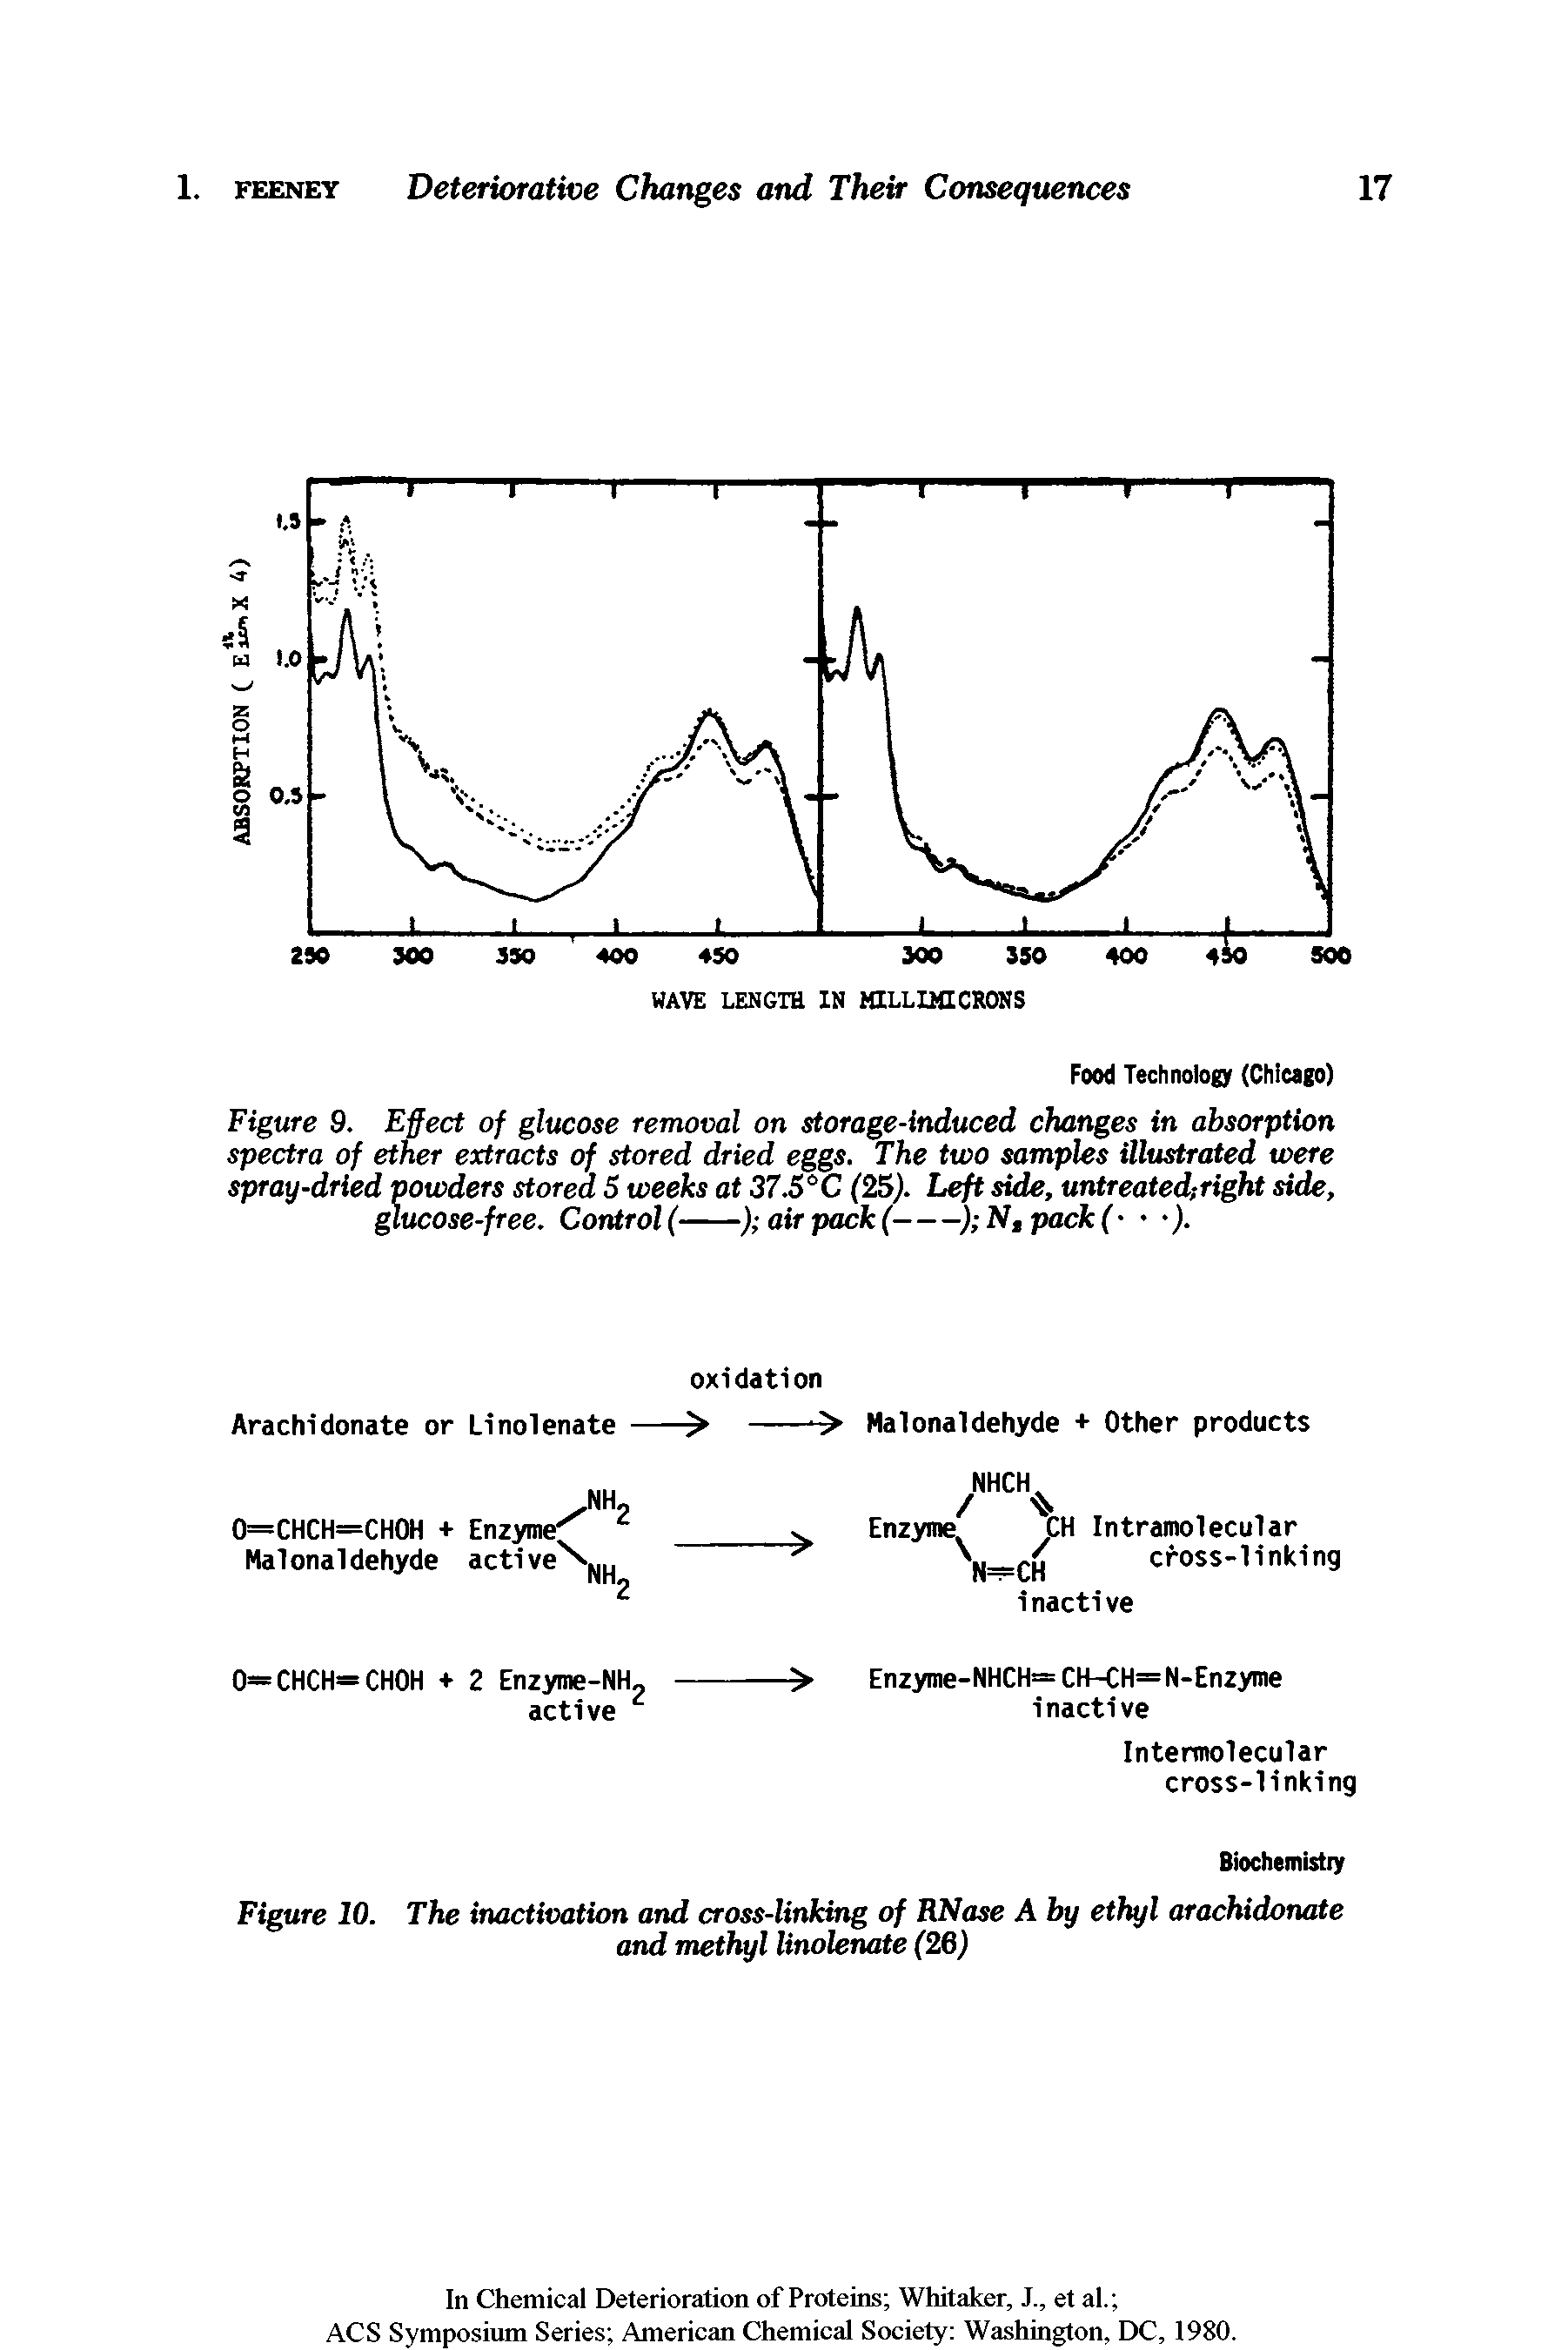 Figure 9. Effect of glucose removal on storage-induced changes in absorption spectra of ether extracts of stored dried eggs. The two samples illustrated were spray-dried powders stored 5 weeks at 37.5°C (25). Left side, untreated right side, glucose-free. Control (-----------------) air pack (----) N,pack( ).